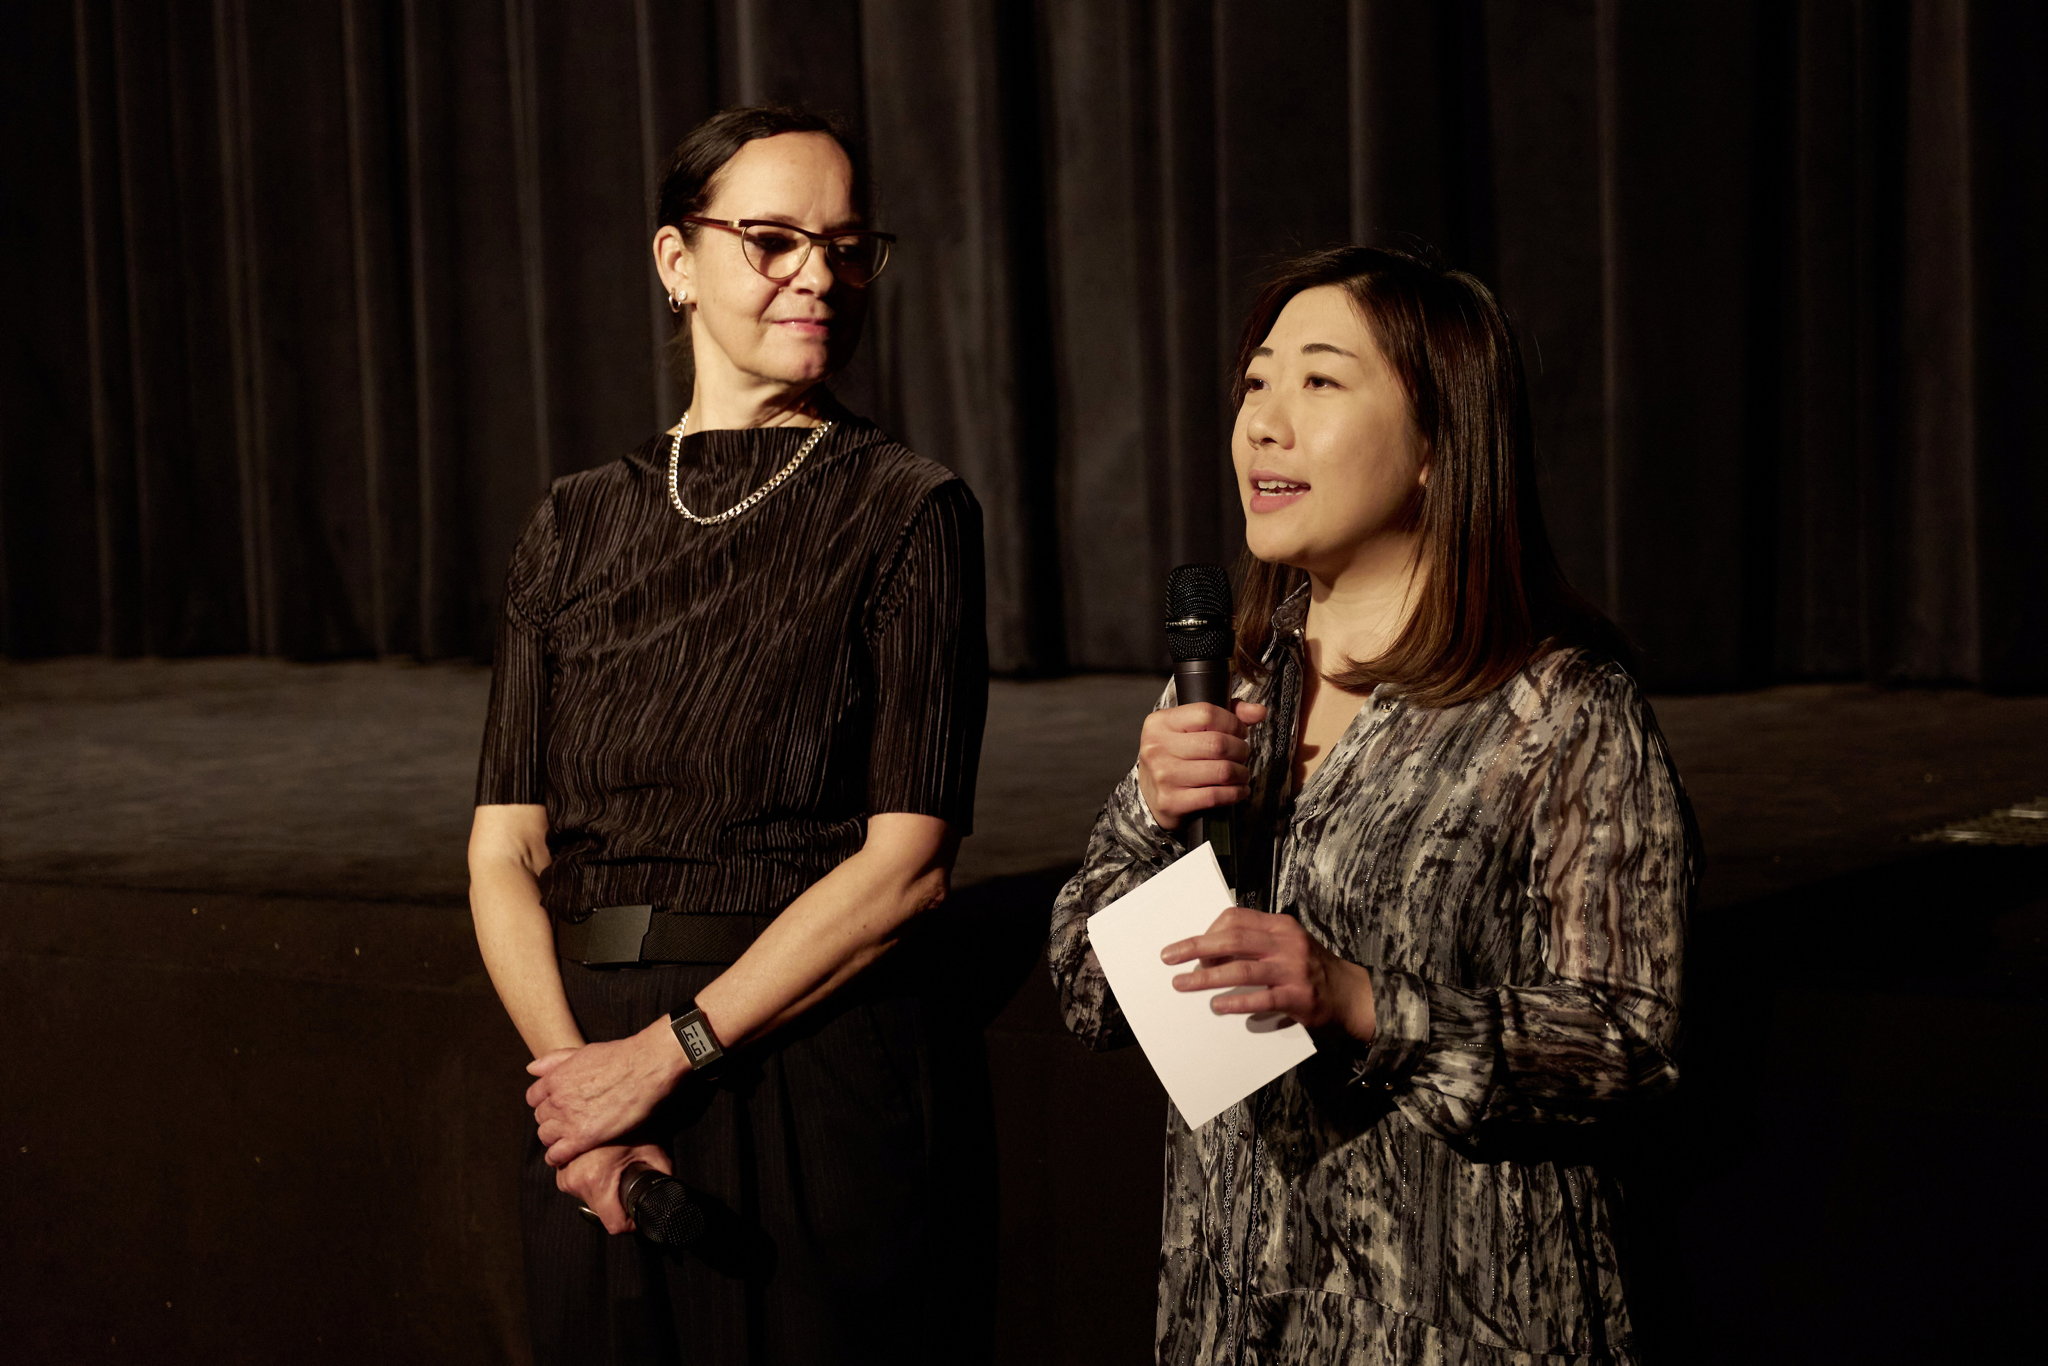 Ms Jenny Szeto, Director of HKETO Berlin, speaking at the opening screening in Vienna on April 22 (Vienna time).